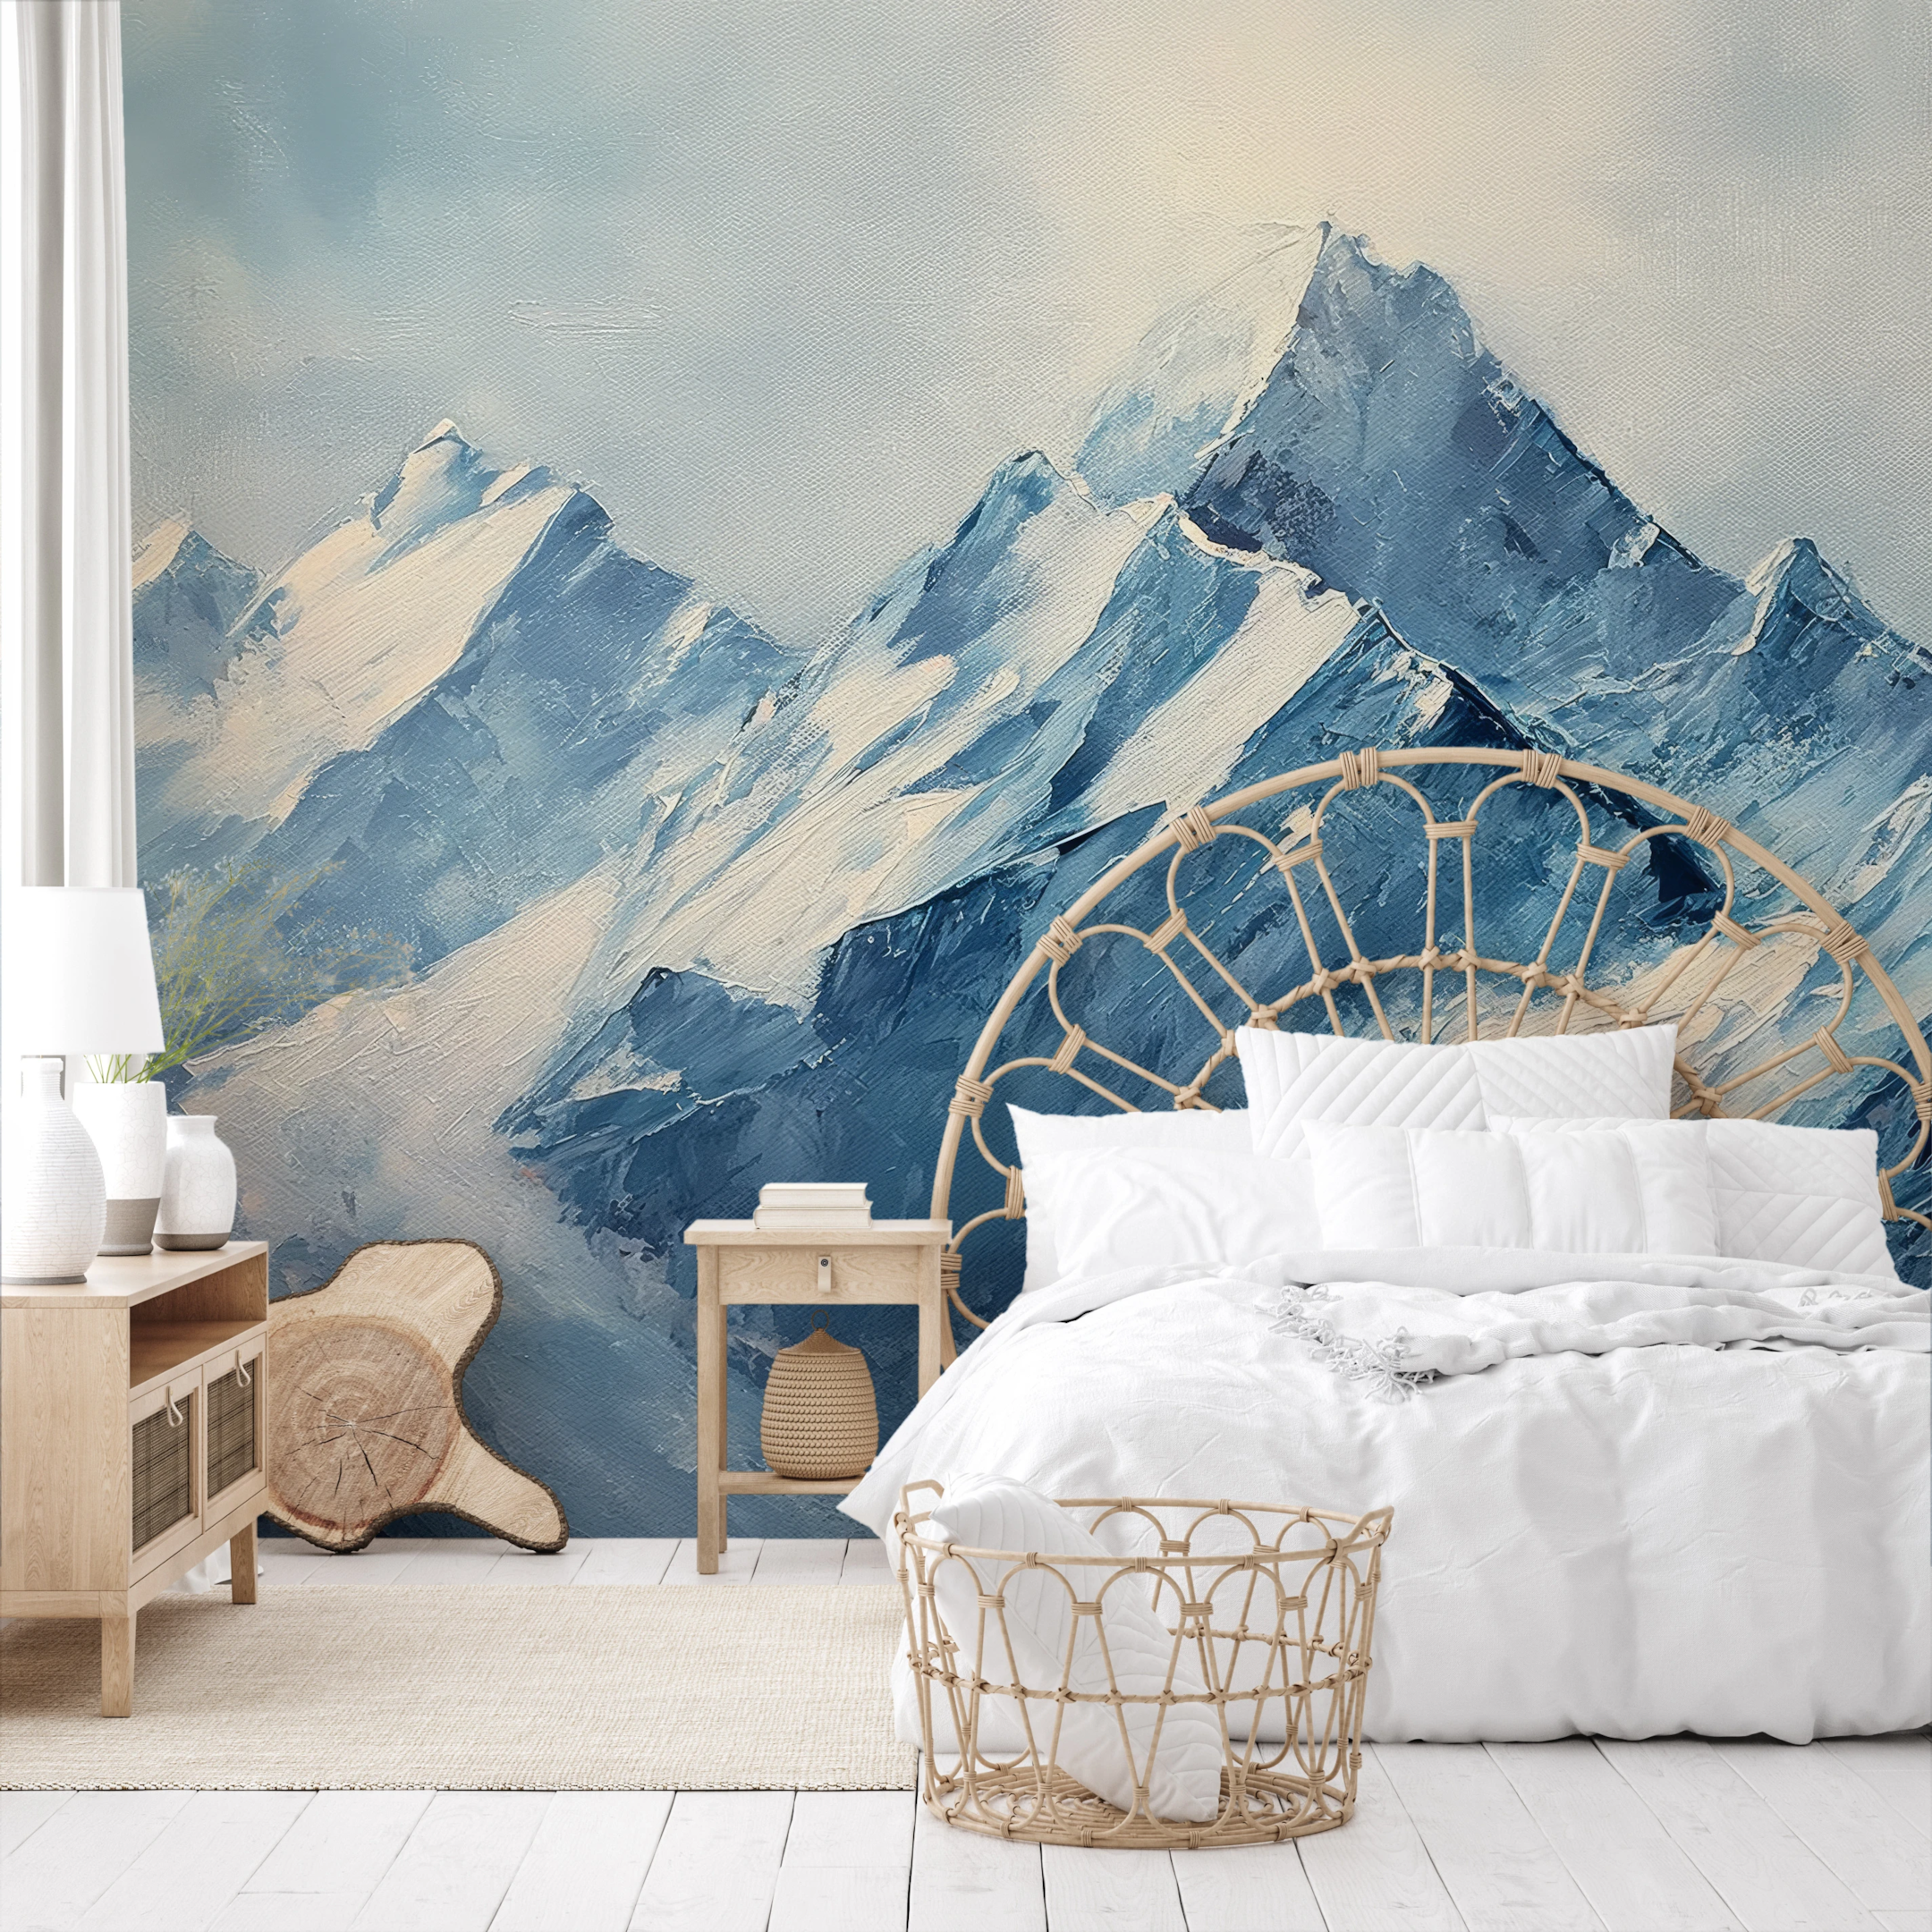 One of the Decomura photo wallpaper patterns from the "Mountains" collection